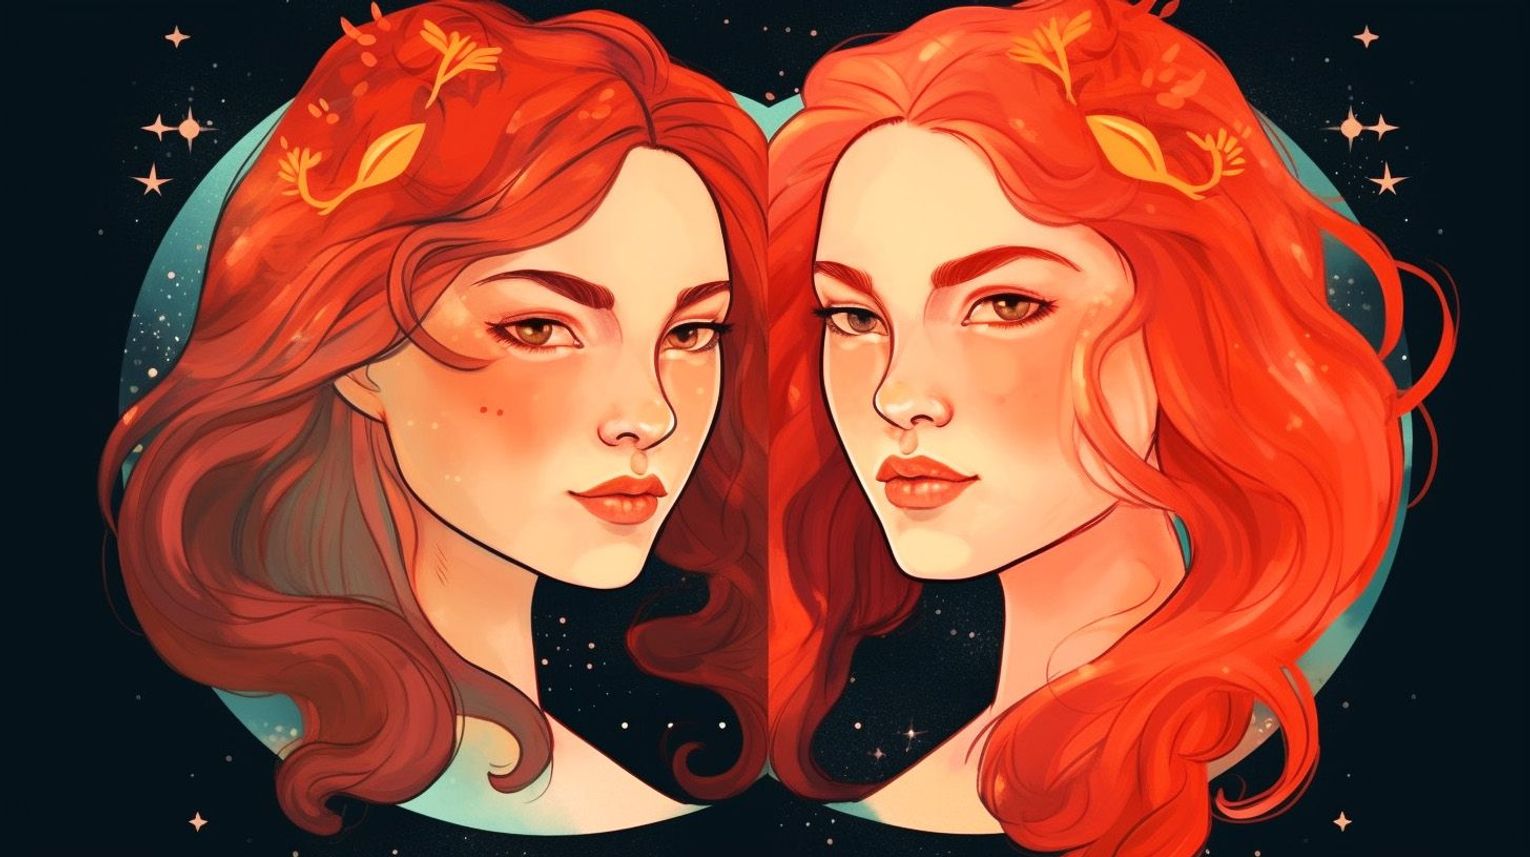 Aries and Gemini Compatibility